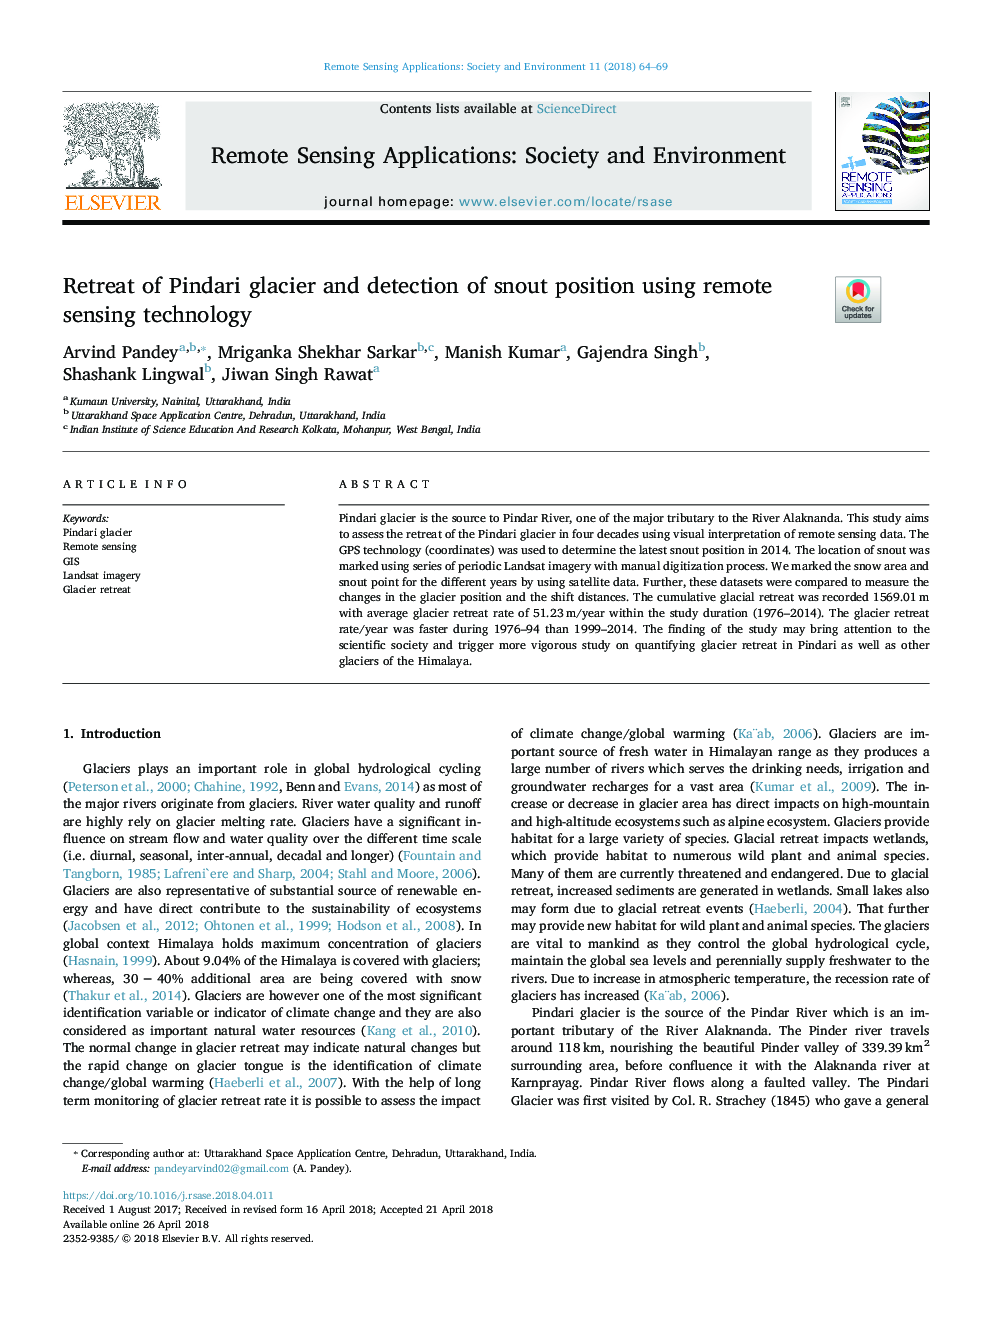 Retreat of Pindari glacier and detection of snout position using remote sensing technology